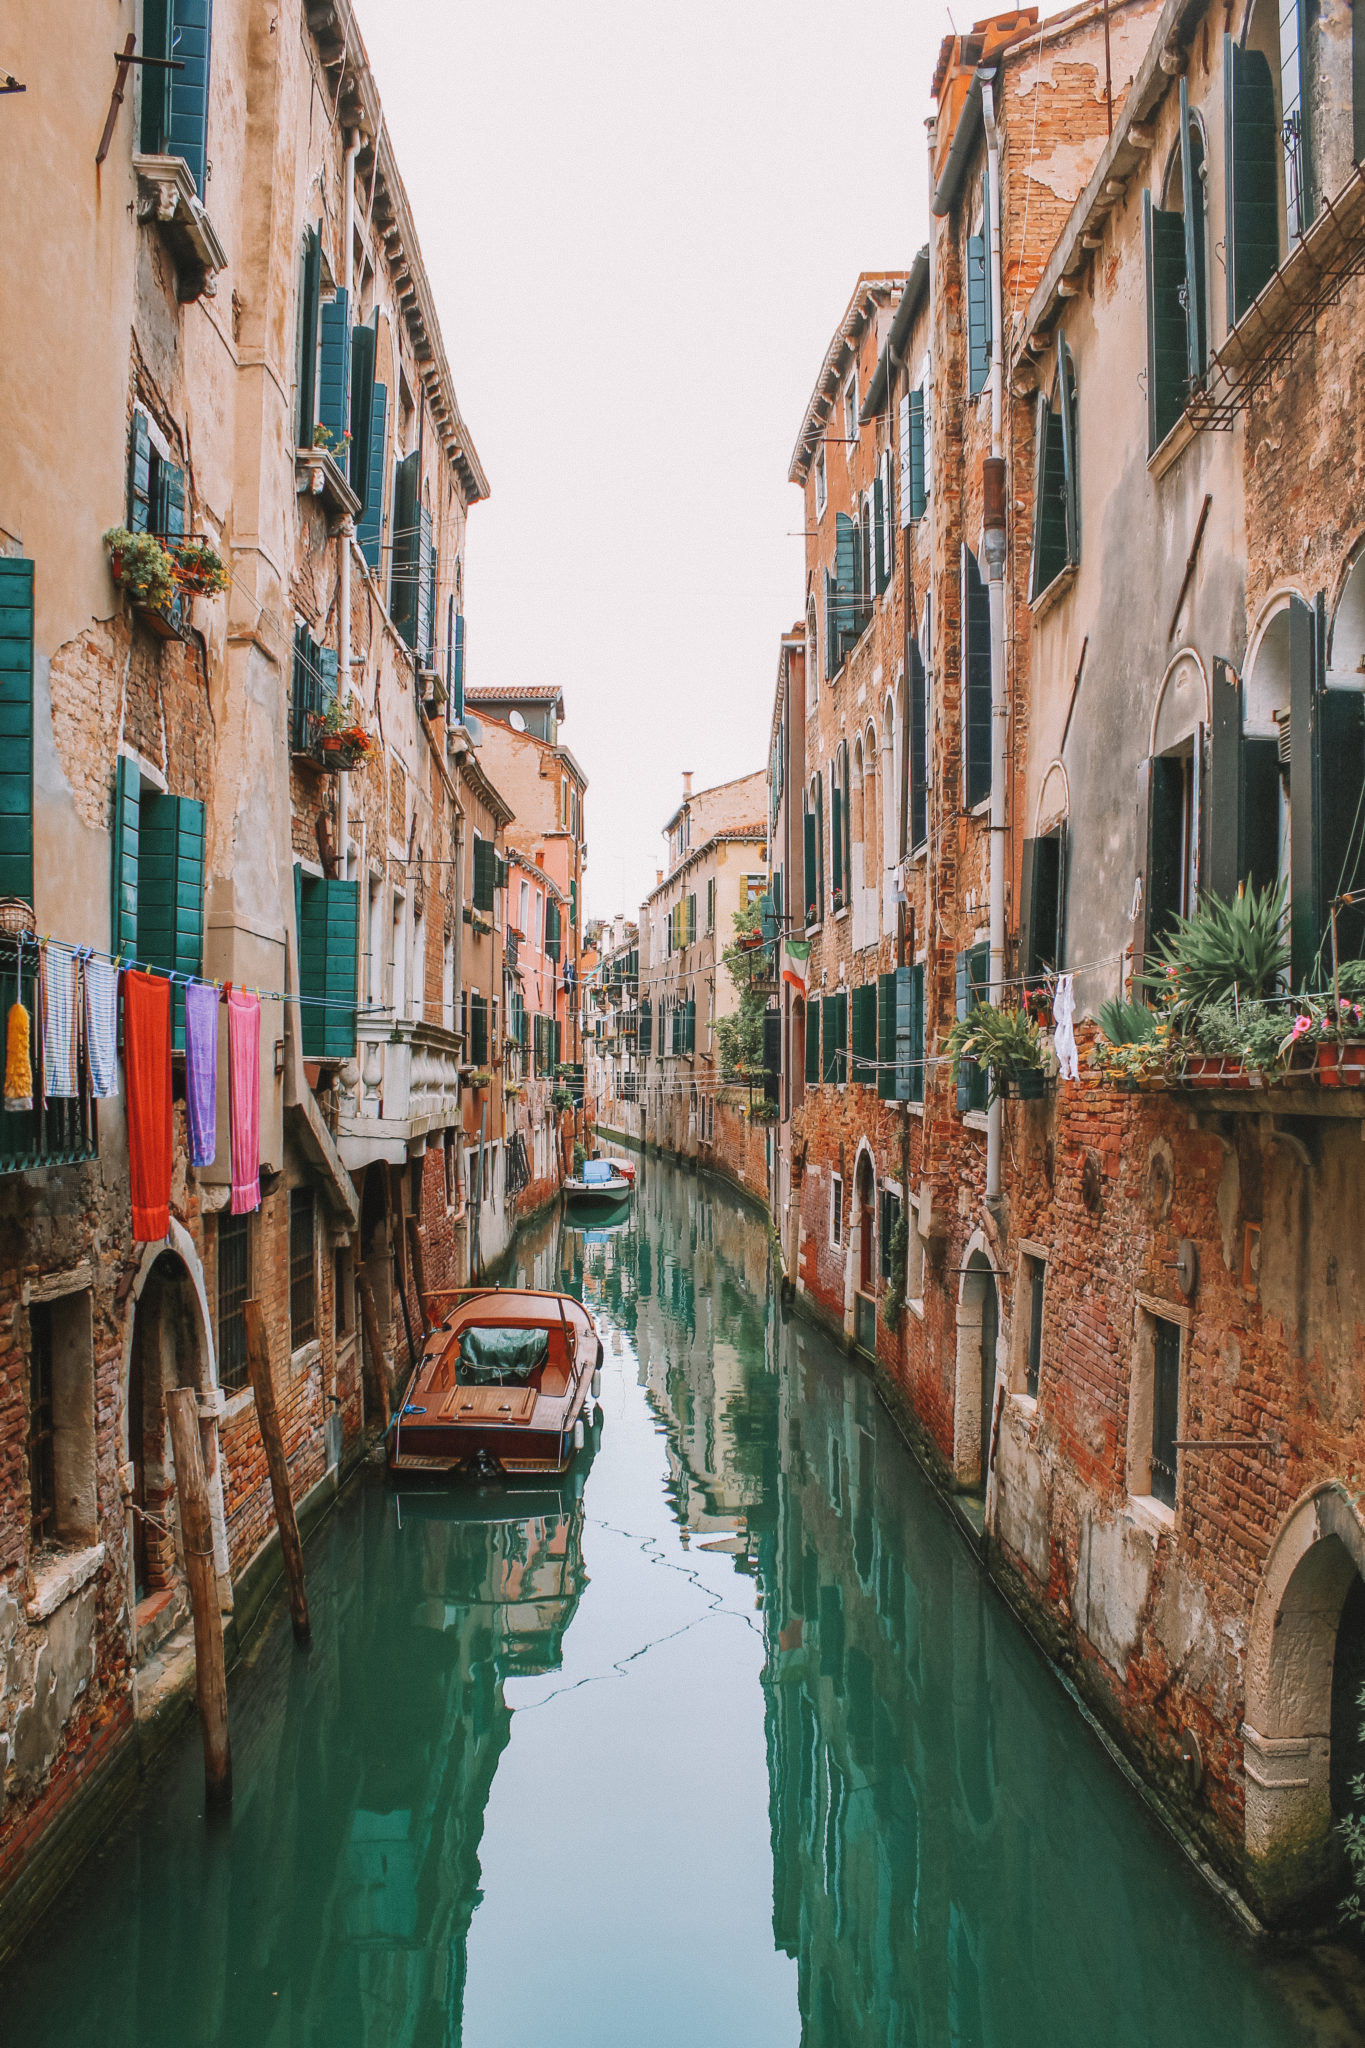 Fall in love with Italy | WORLD OF WANDERLUST